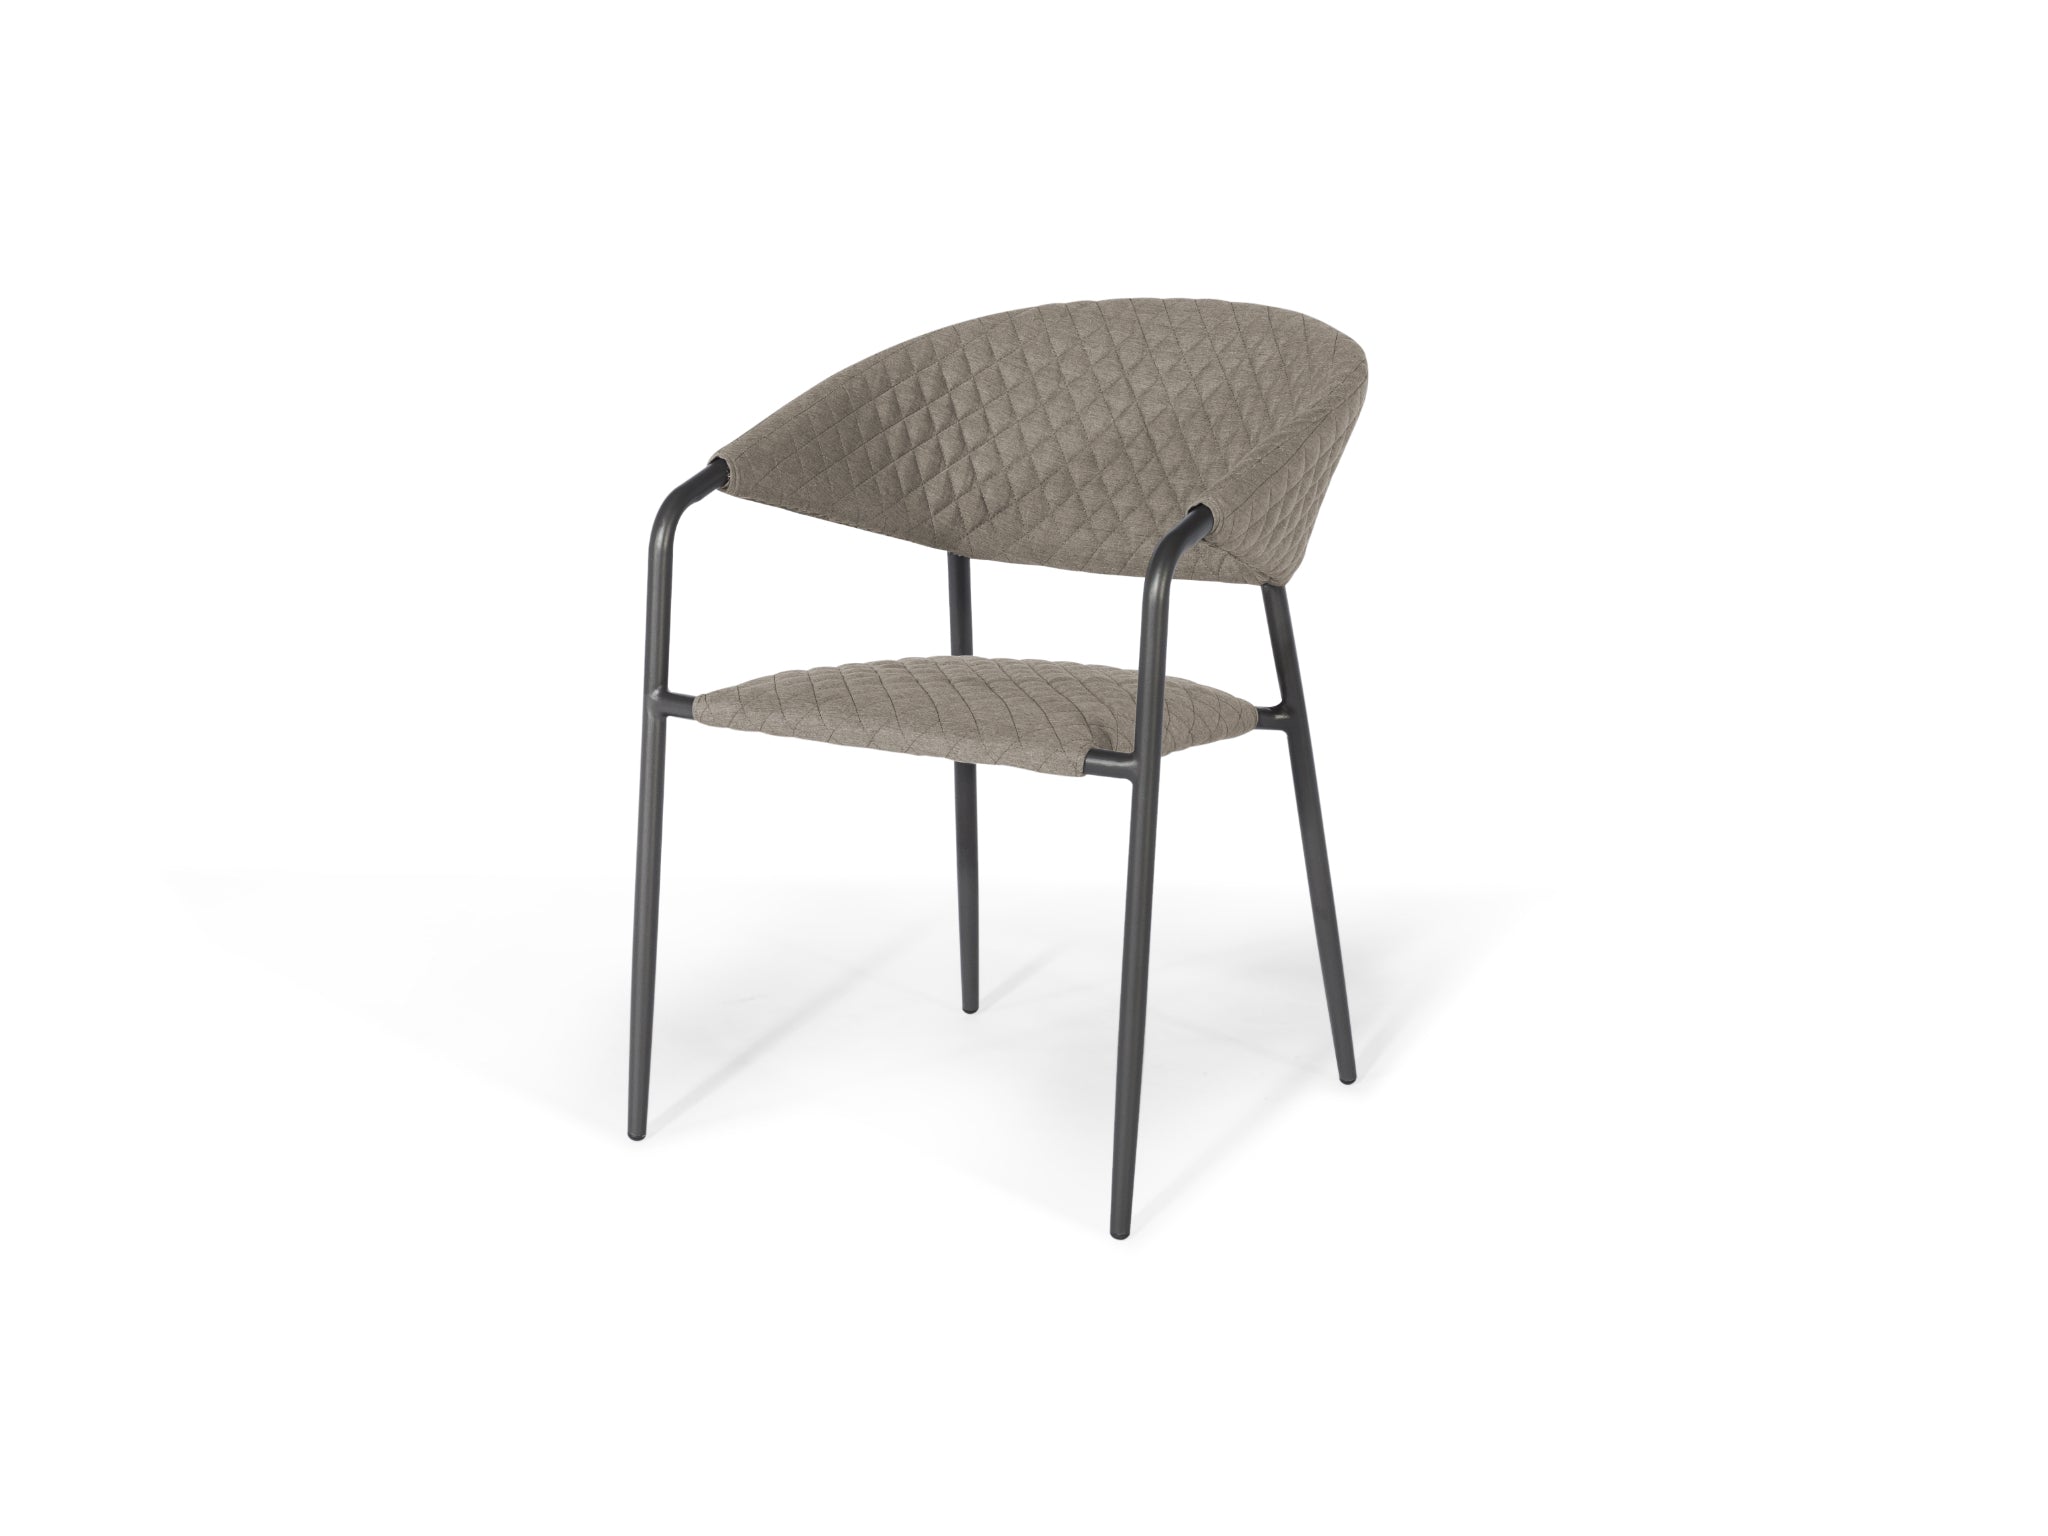 SIMPO by Sunlongarden Pebble Dining Chair